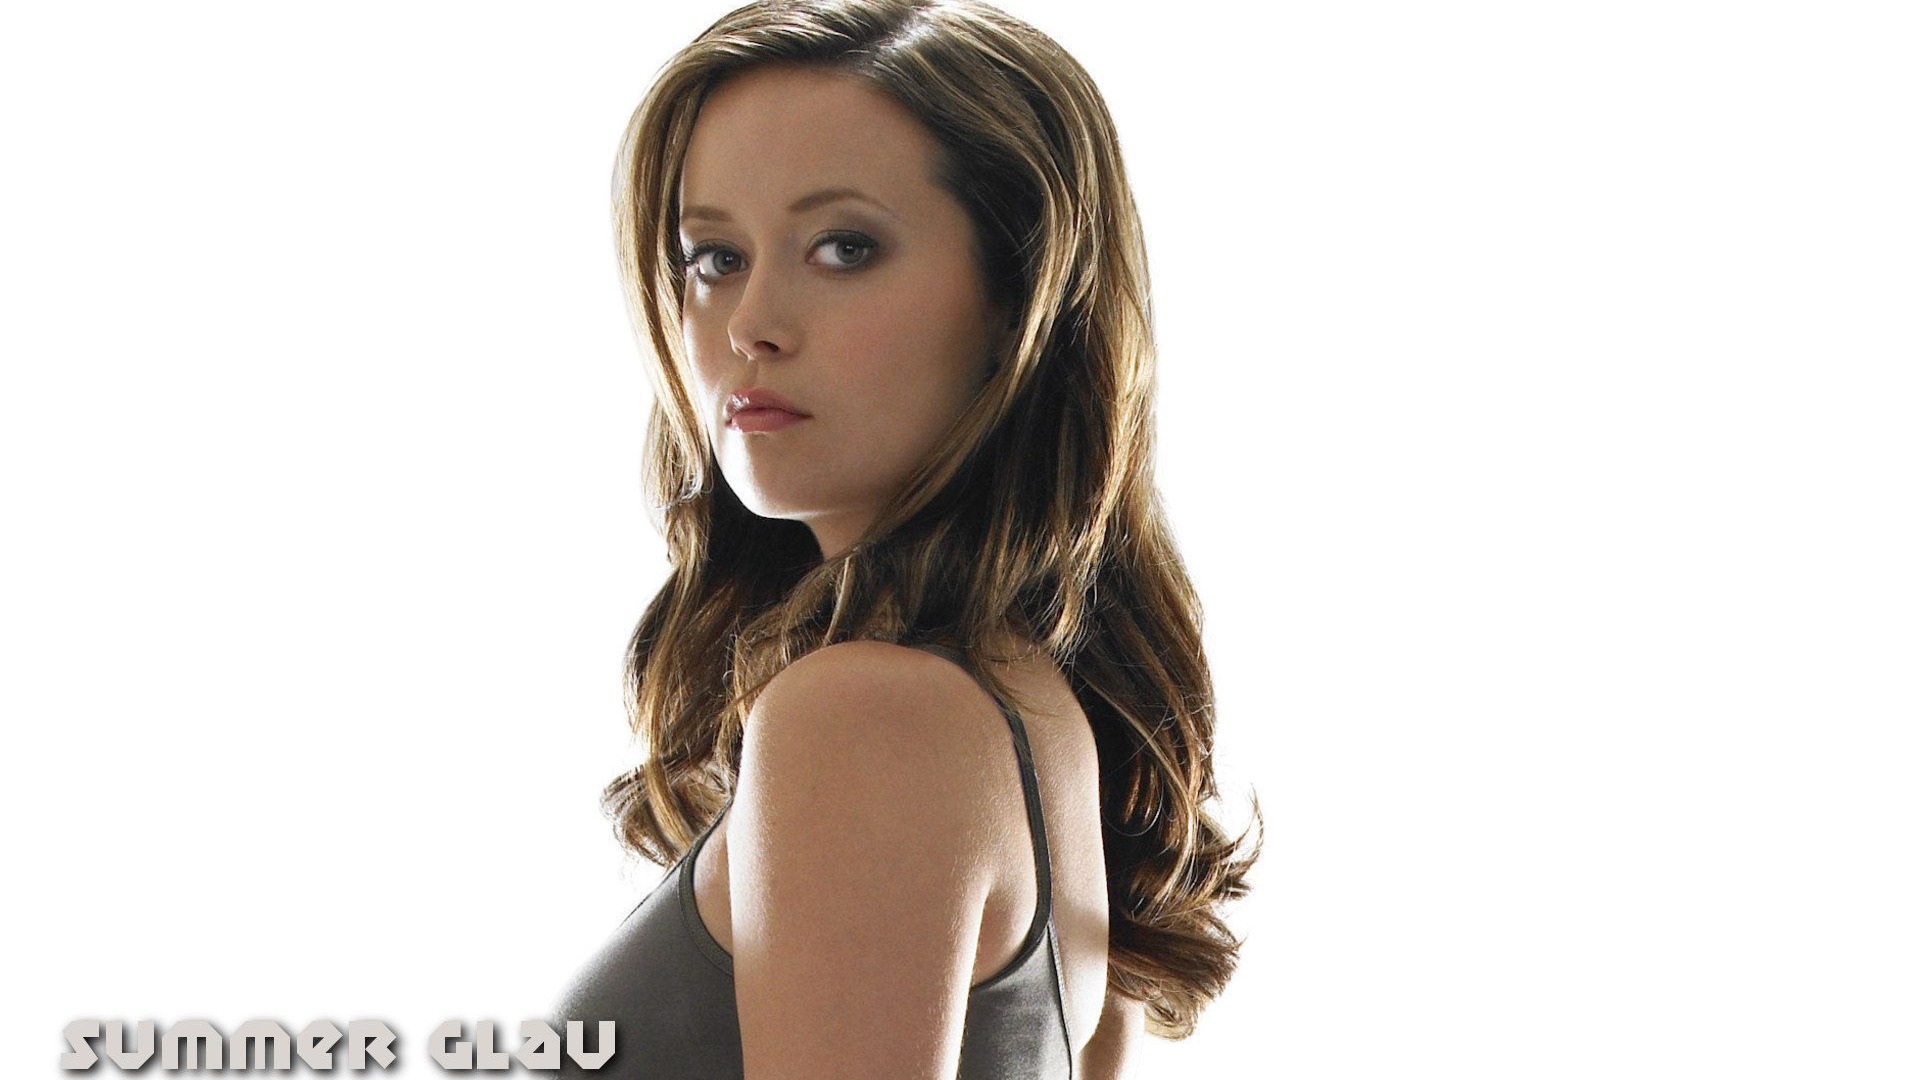 Summer Glau #028 - 1920x1080 Wallpapers Pictures Photos Images